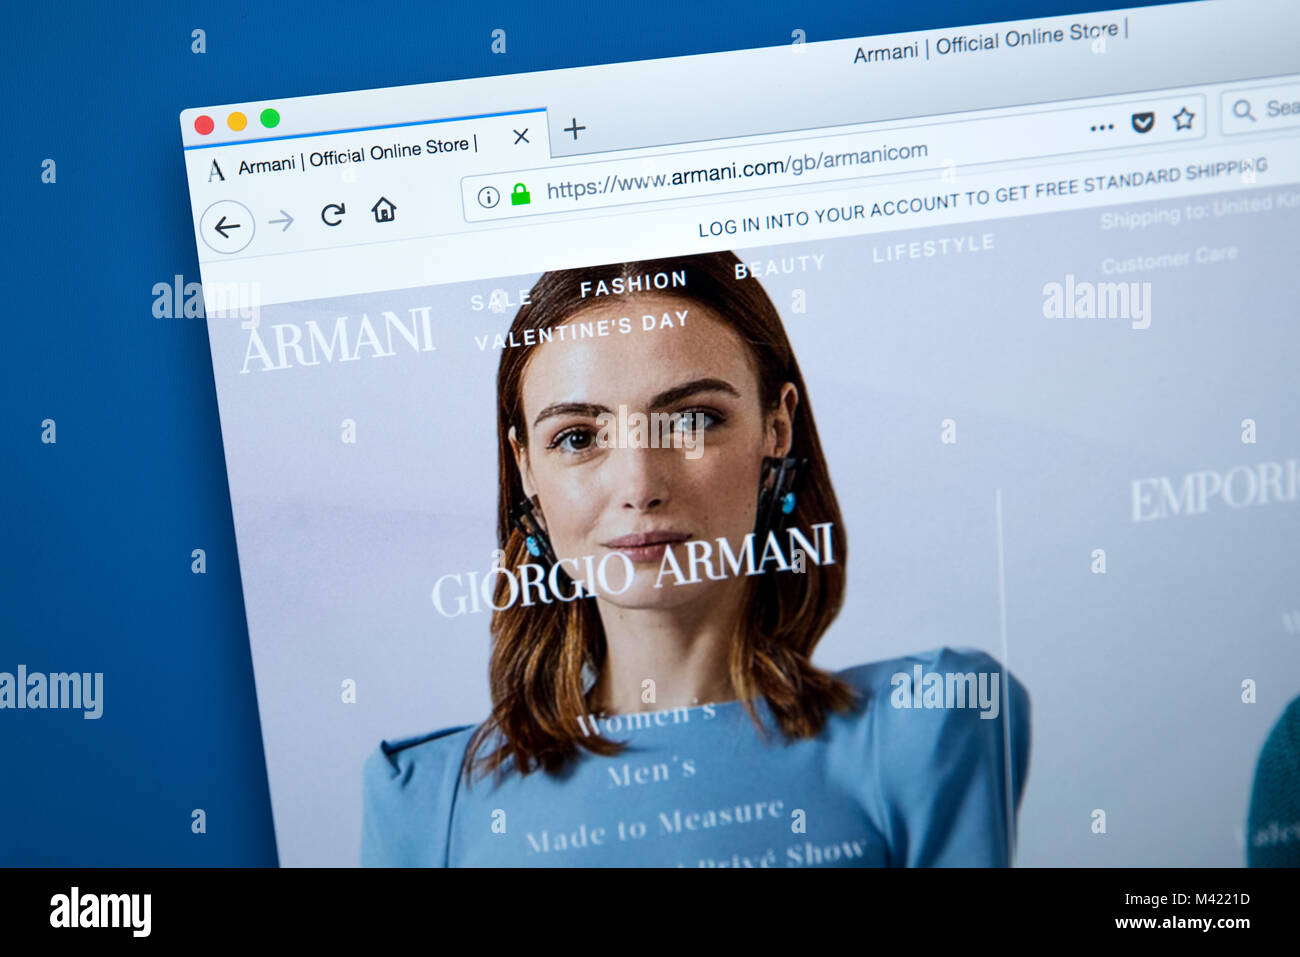 armani official website